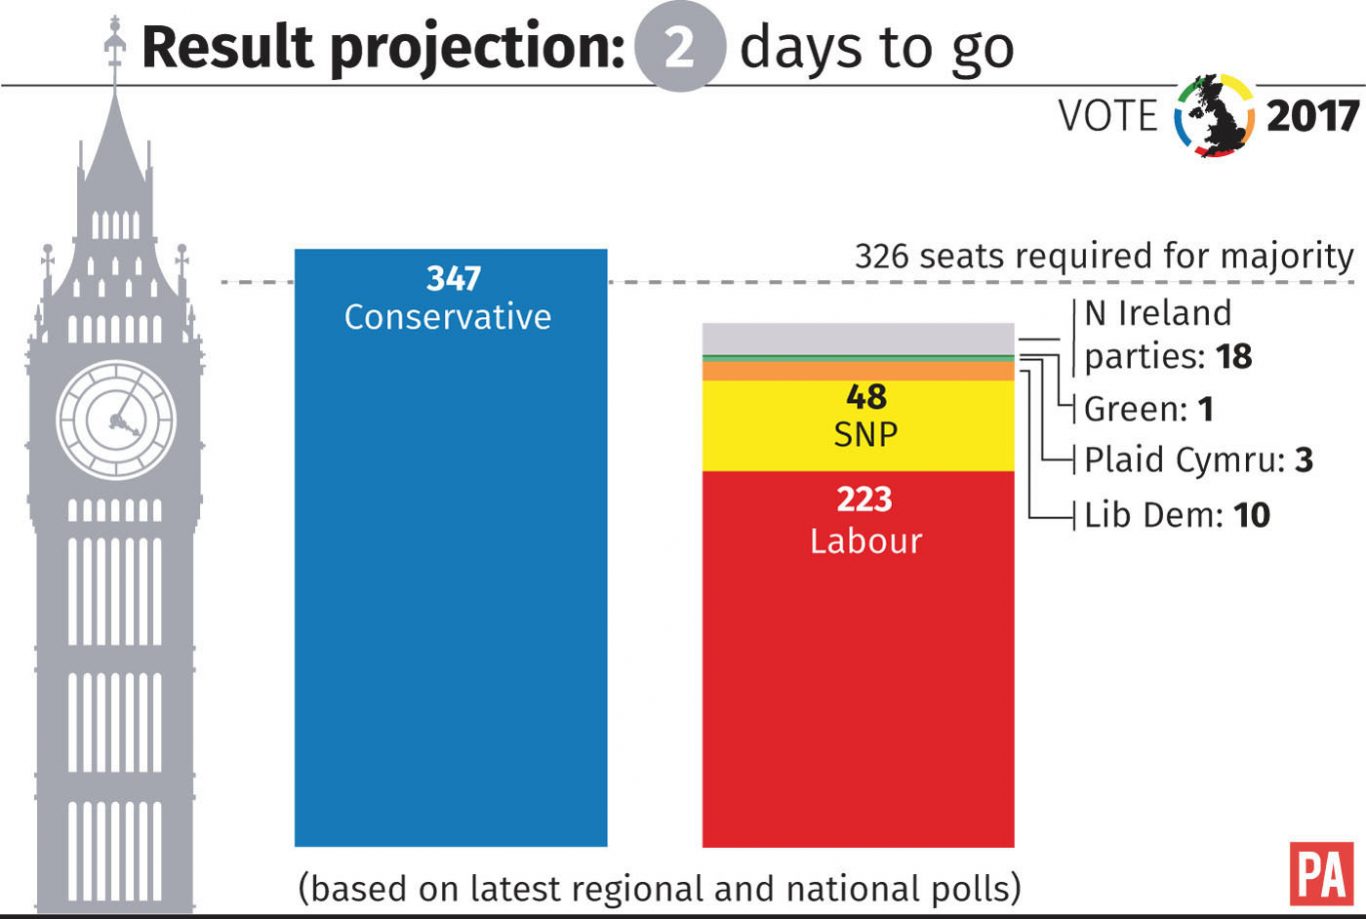 Result projection based on latest regional and national polls.